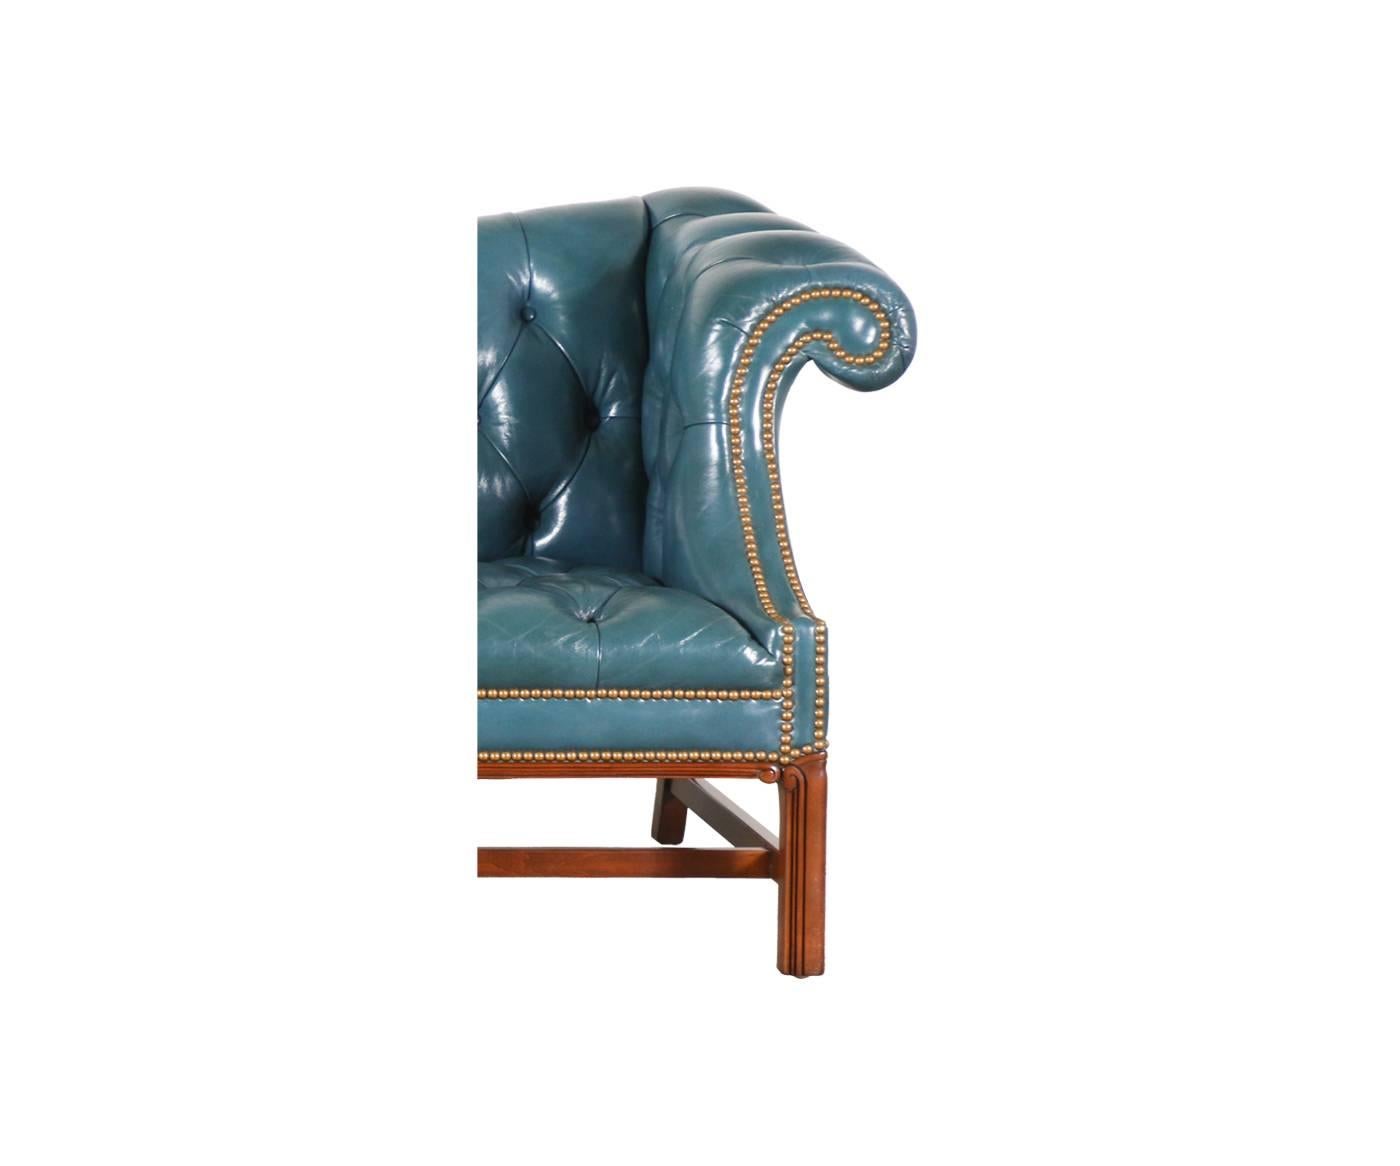 Mid-20th Century Vintage English Leather Teal Blue Chesterfield Sofa